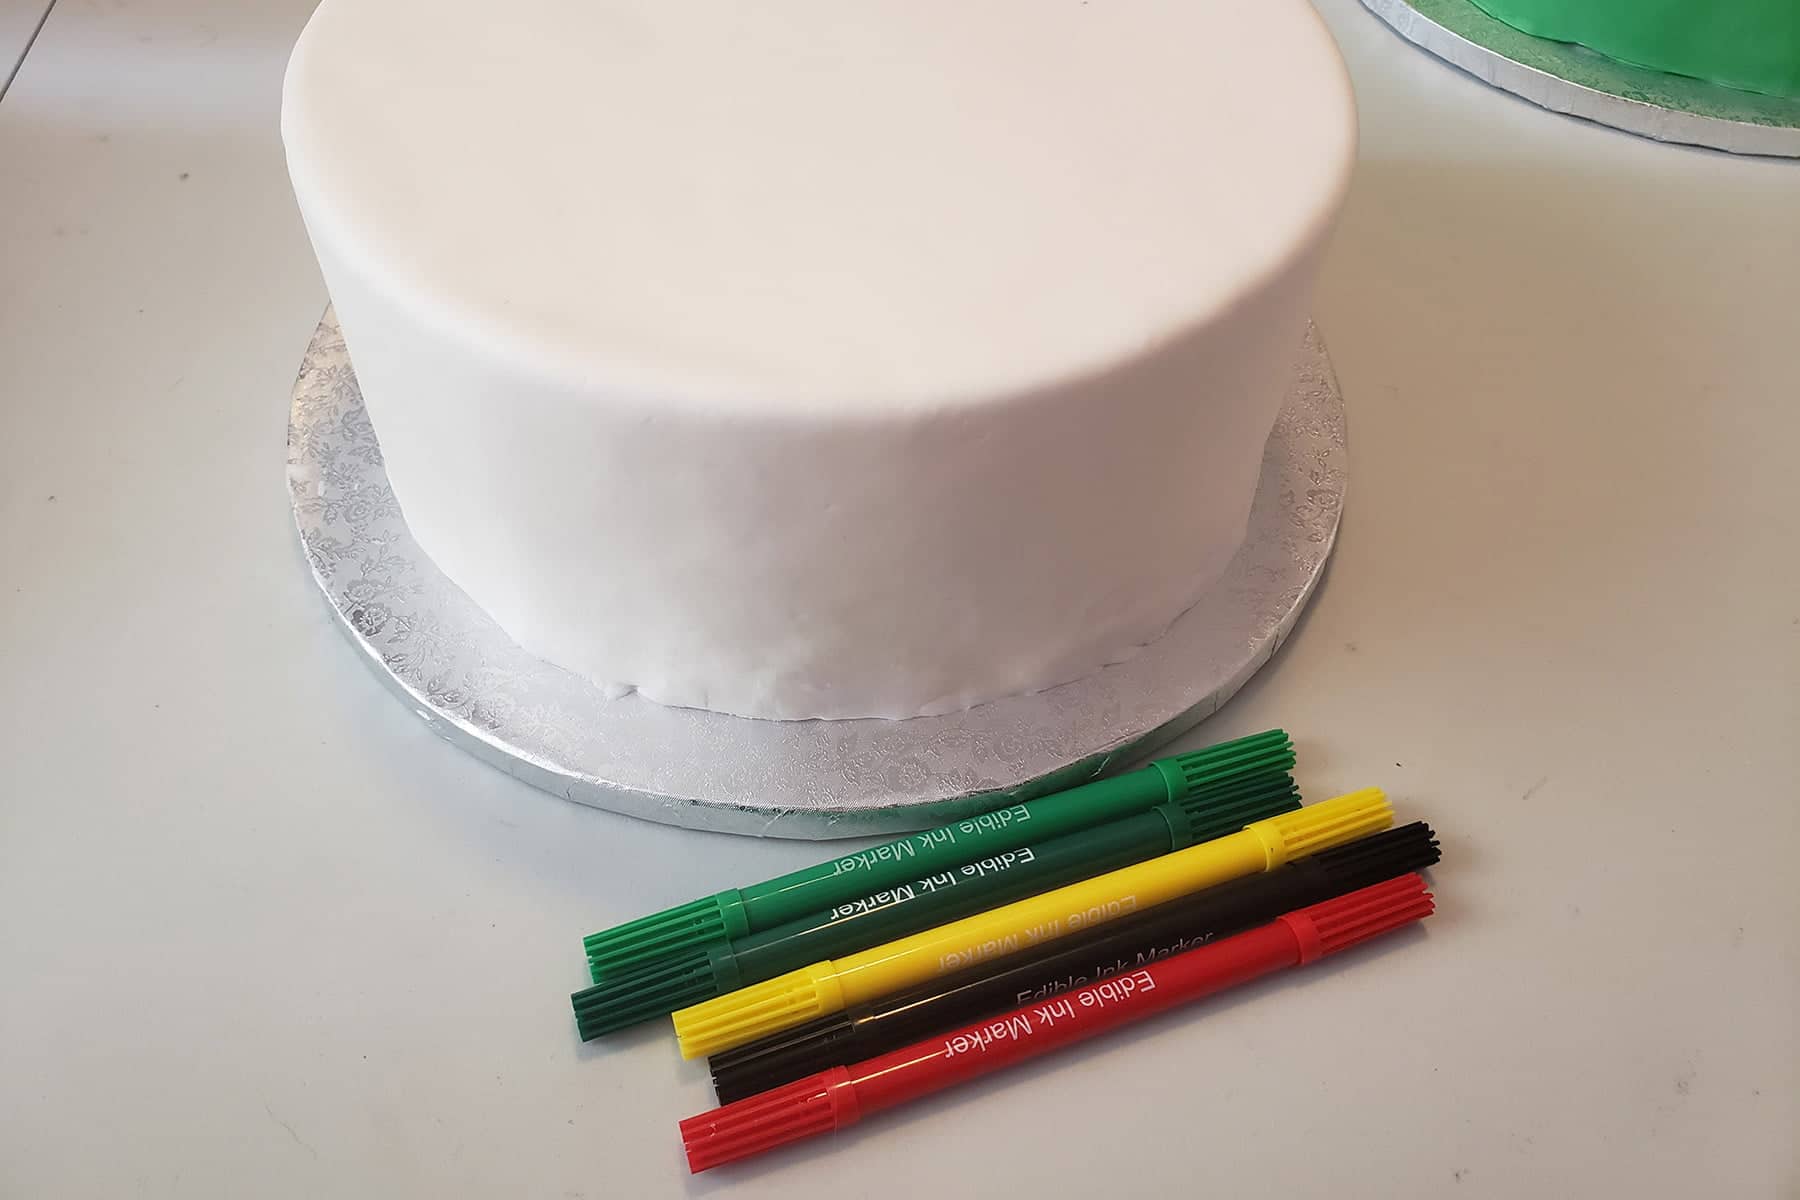 Bright green dark green, yellow, black and red food colouring markers are lined up in front of a large round cake covered in smooth white fondant.